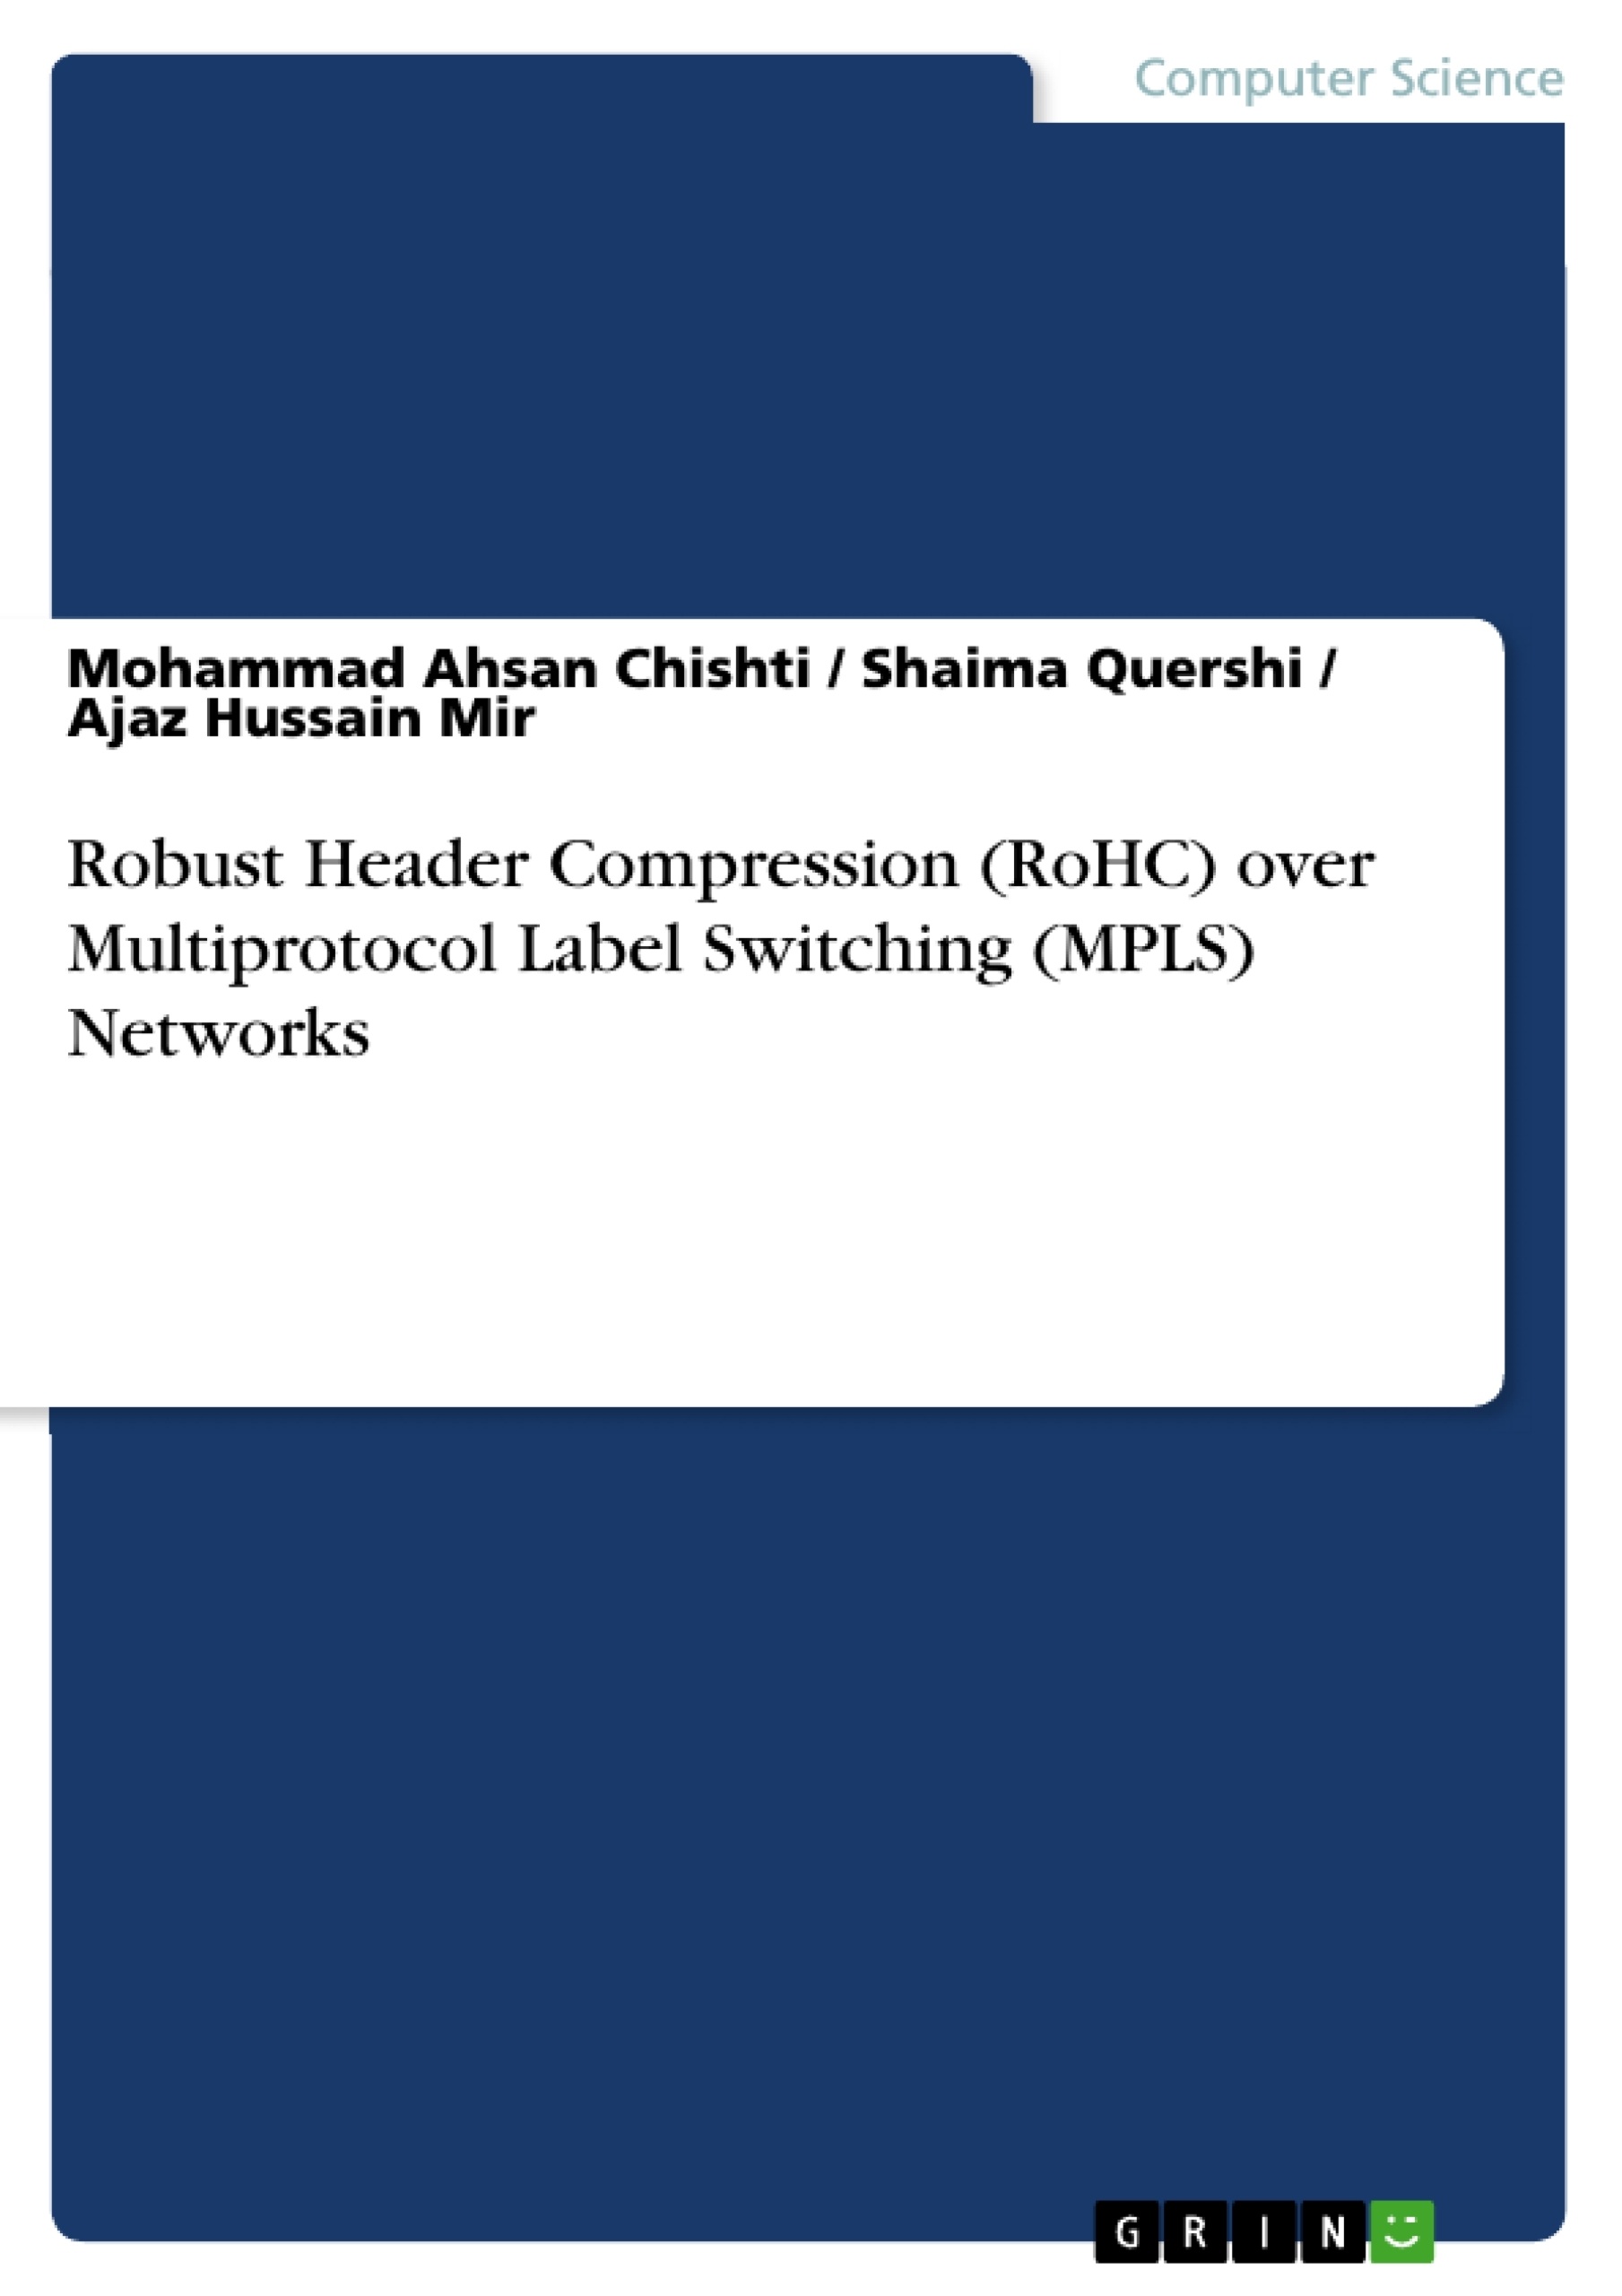 Título: Robust Header Compression (RoHC) over Multiprotocol Label Switching (MPLS) Networks